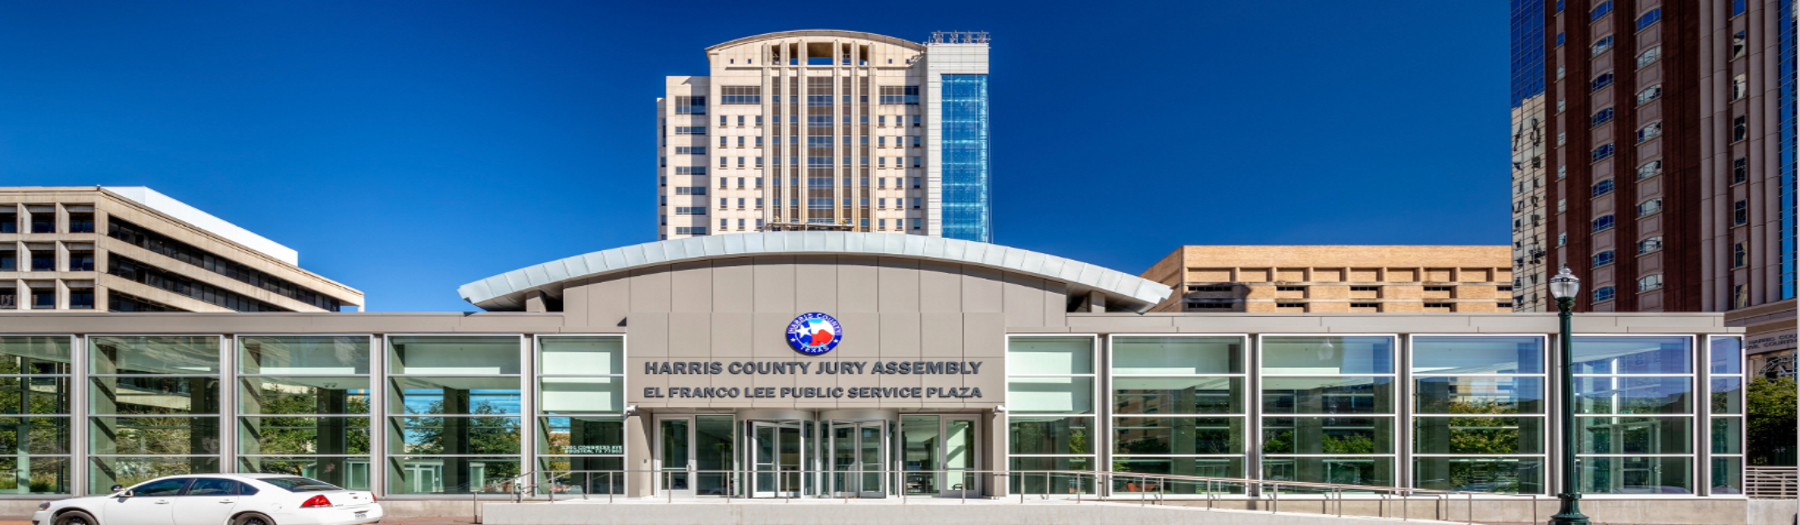 image of the Harris County Jury assembly building.